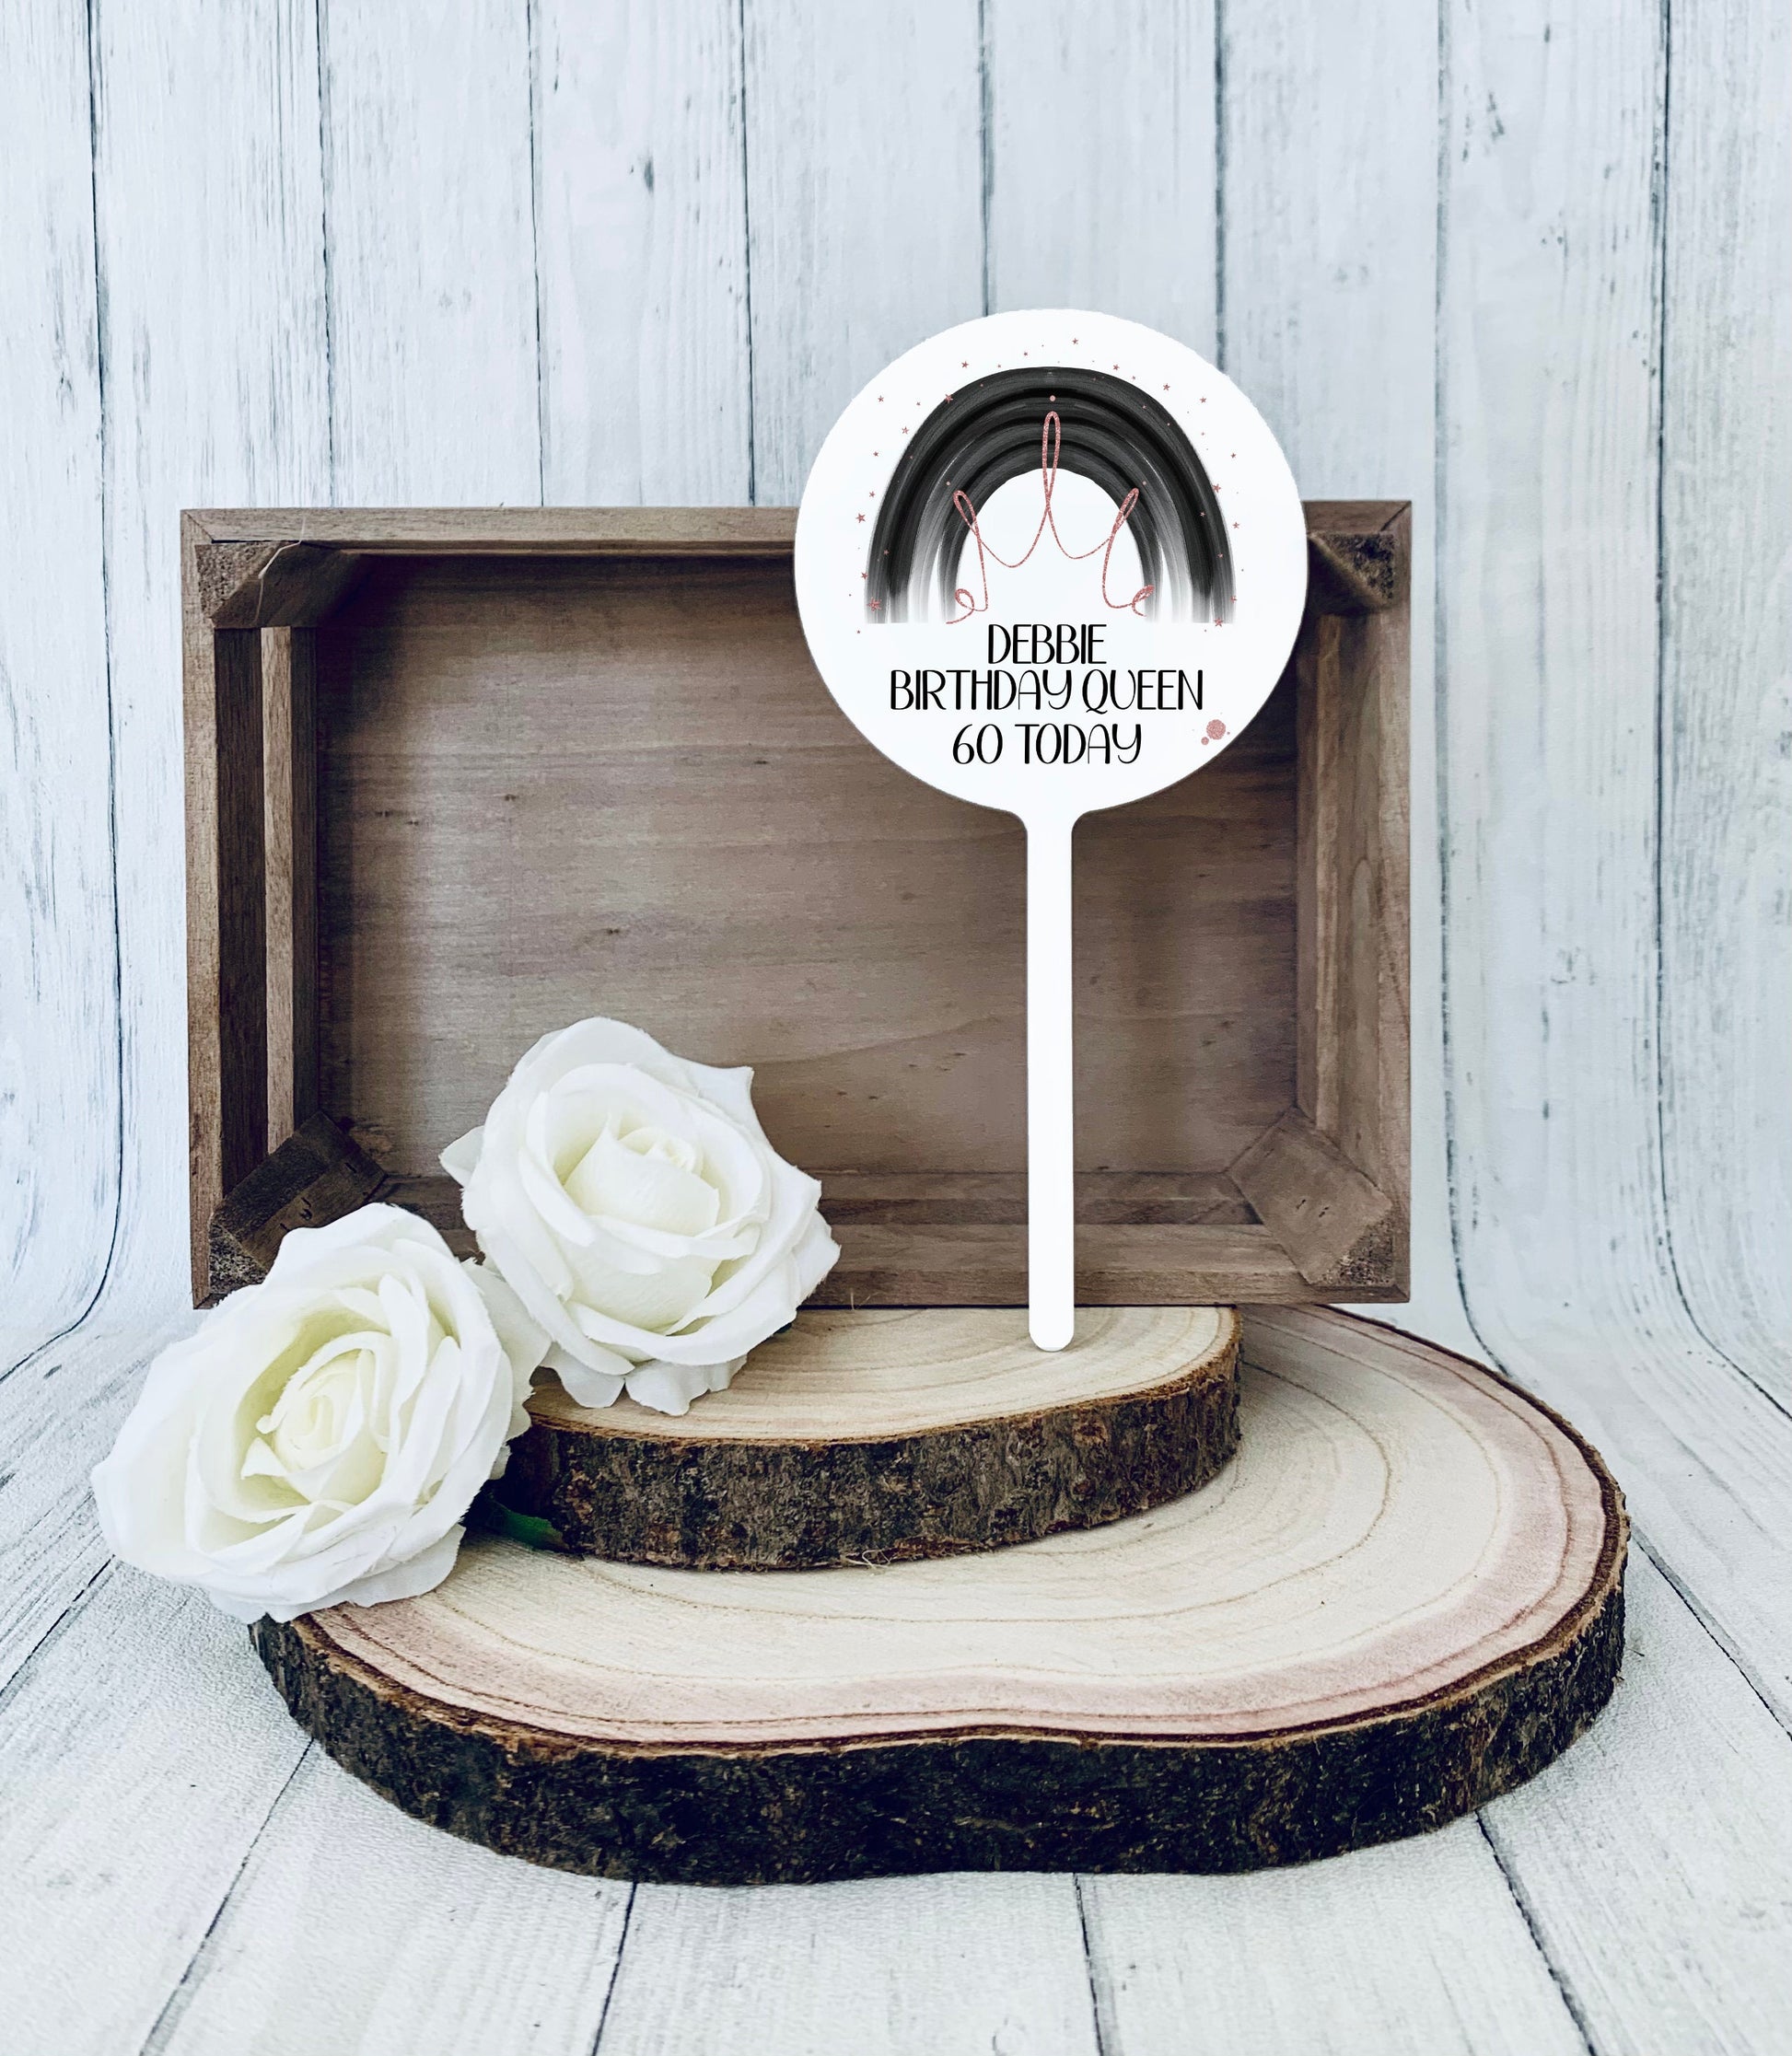 Acrylic round cake topper featuring a black rainbow and a rose gold crown with personalised birthday text